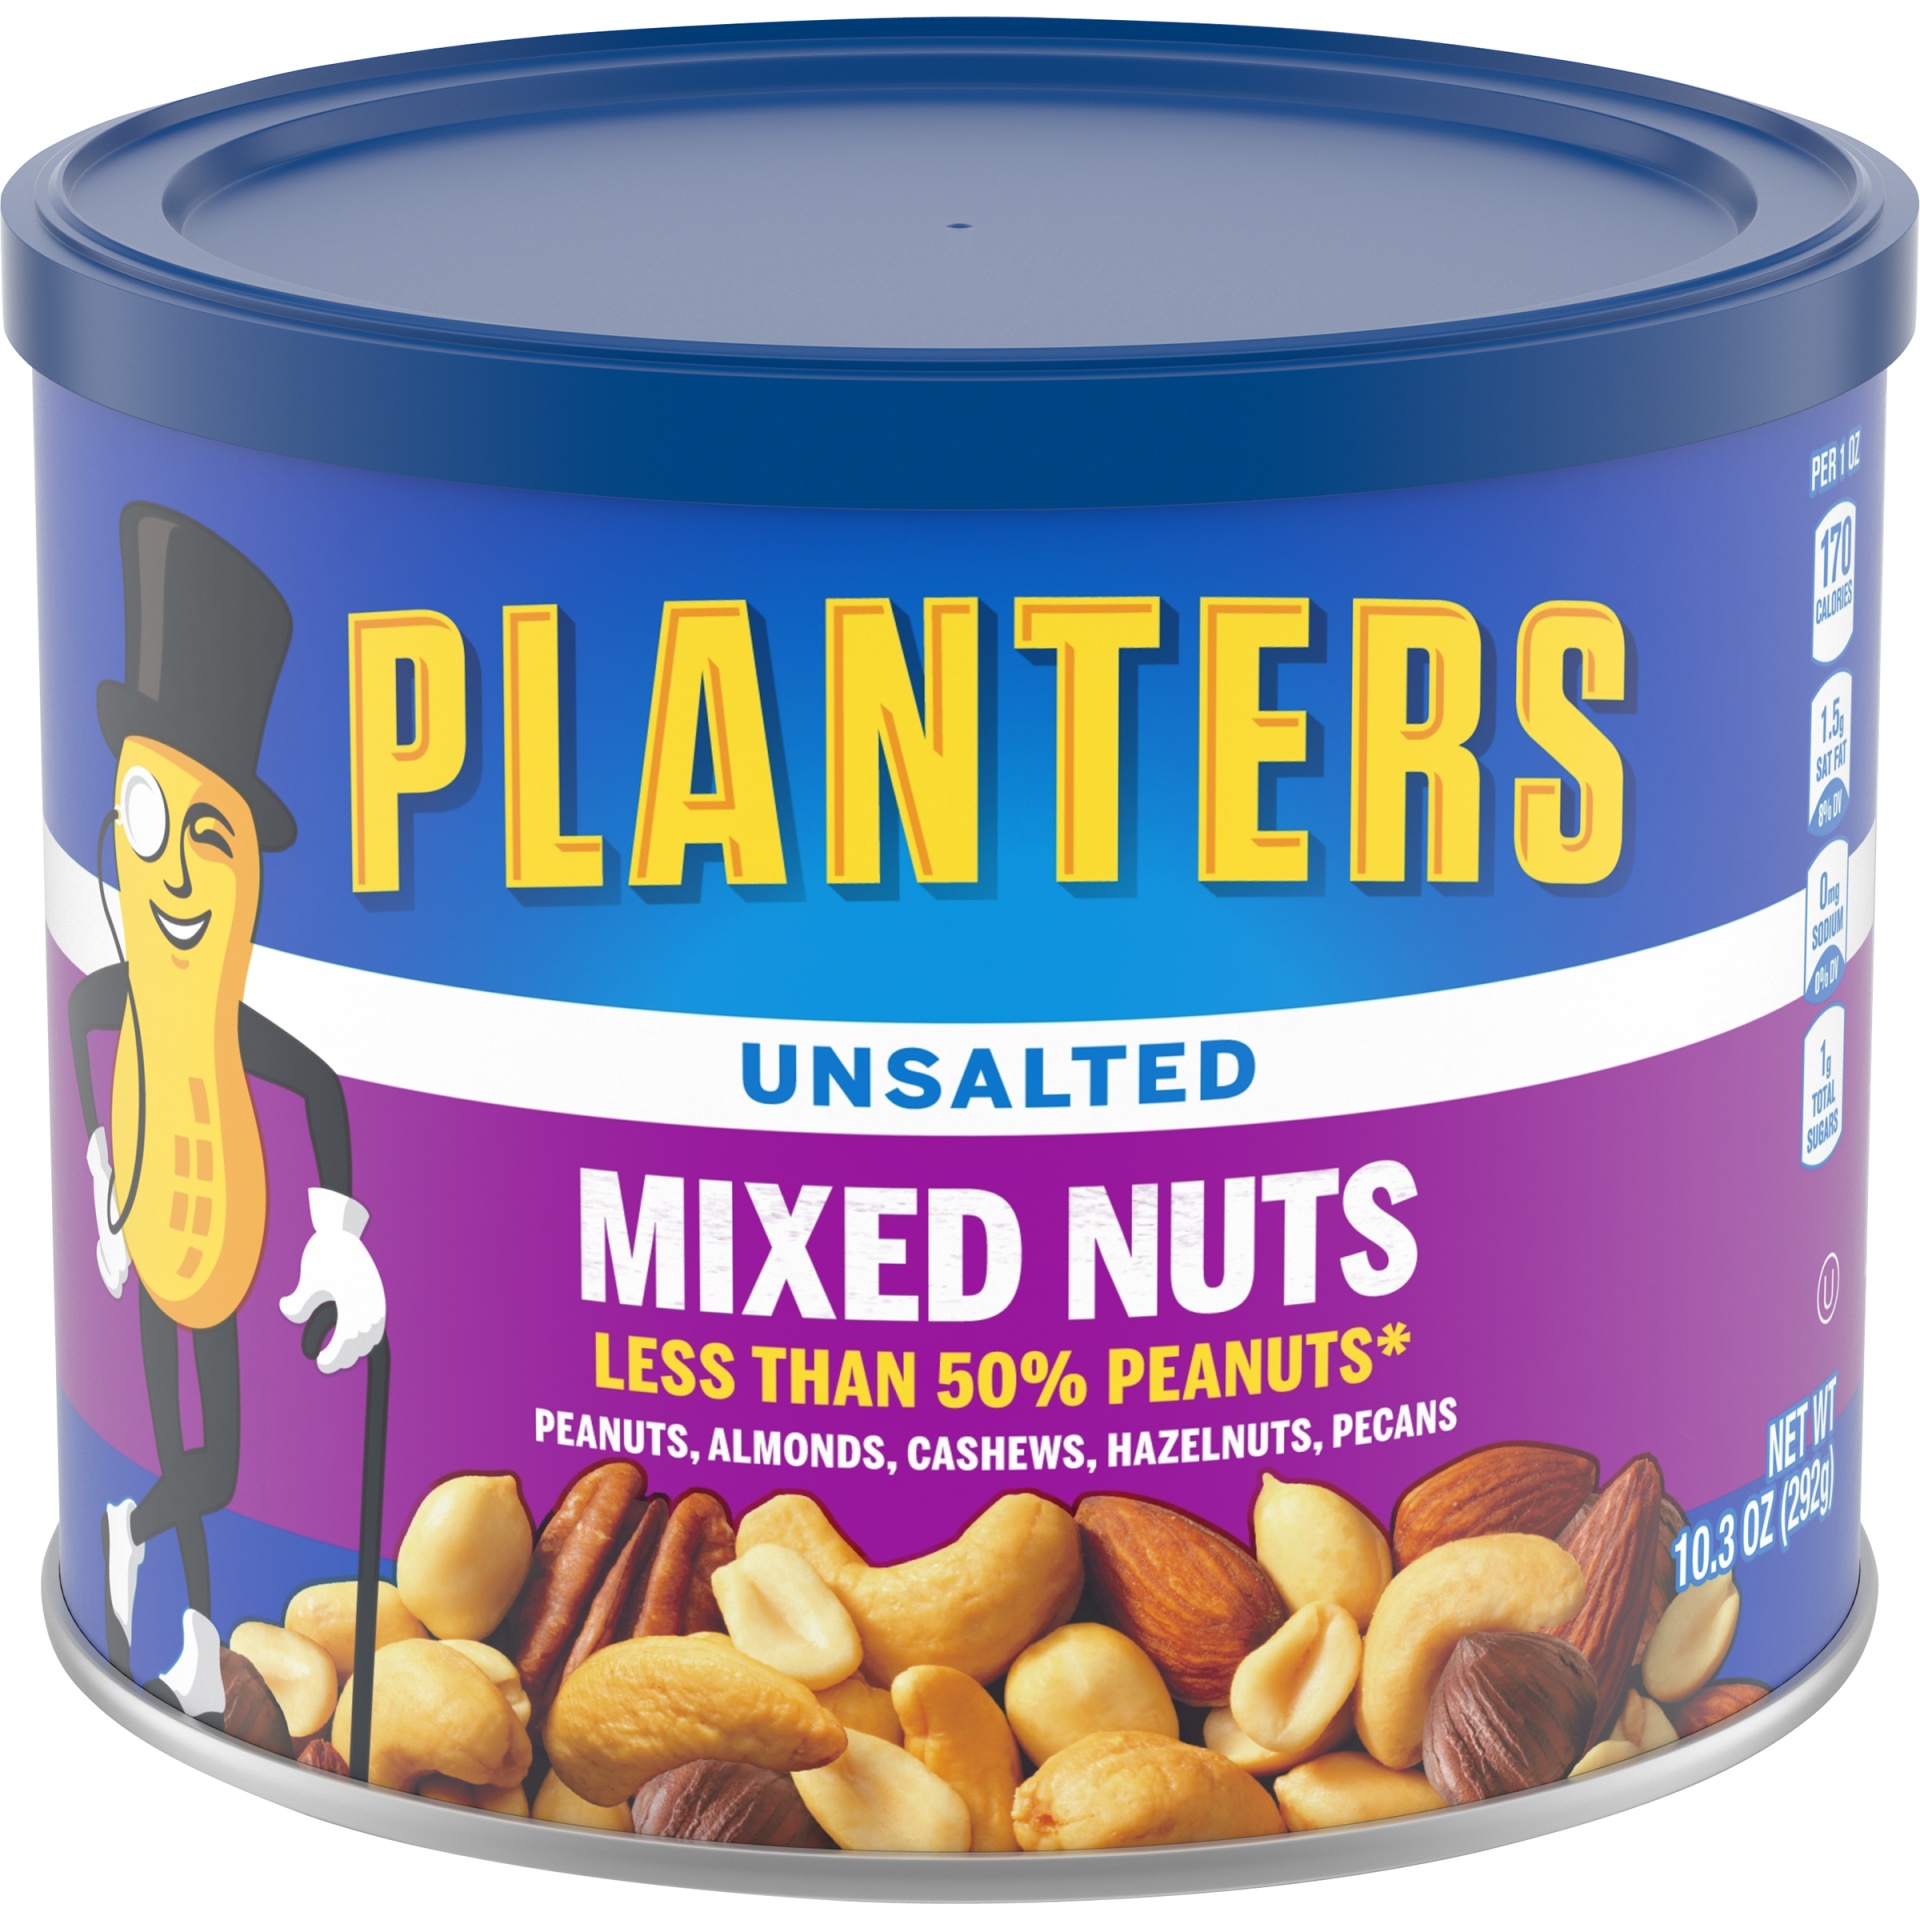 slide 1 of 8, Planters Unsalted Mixed Nuts Less Than 50% Peanuts with Peanuts, Almonds, Cashews, Hazelnuts & Pecans, 10.3 oz